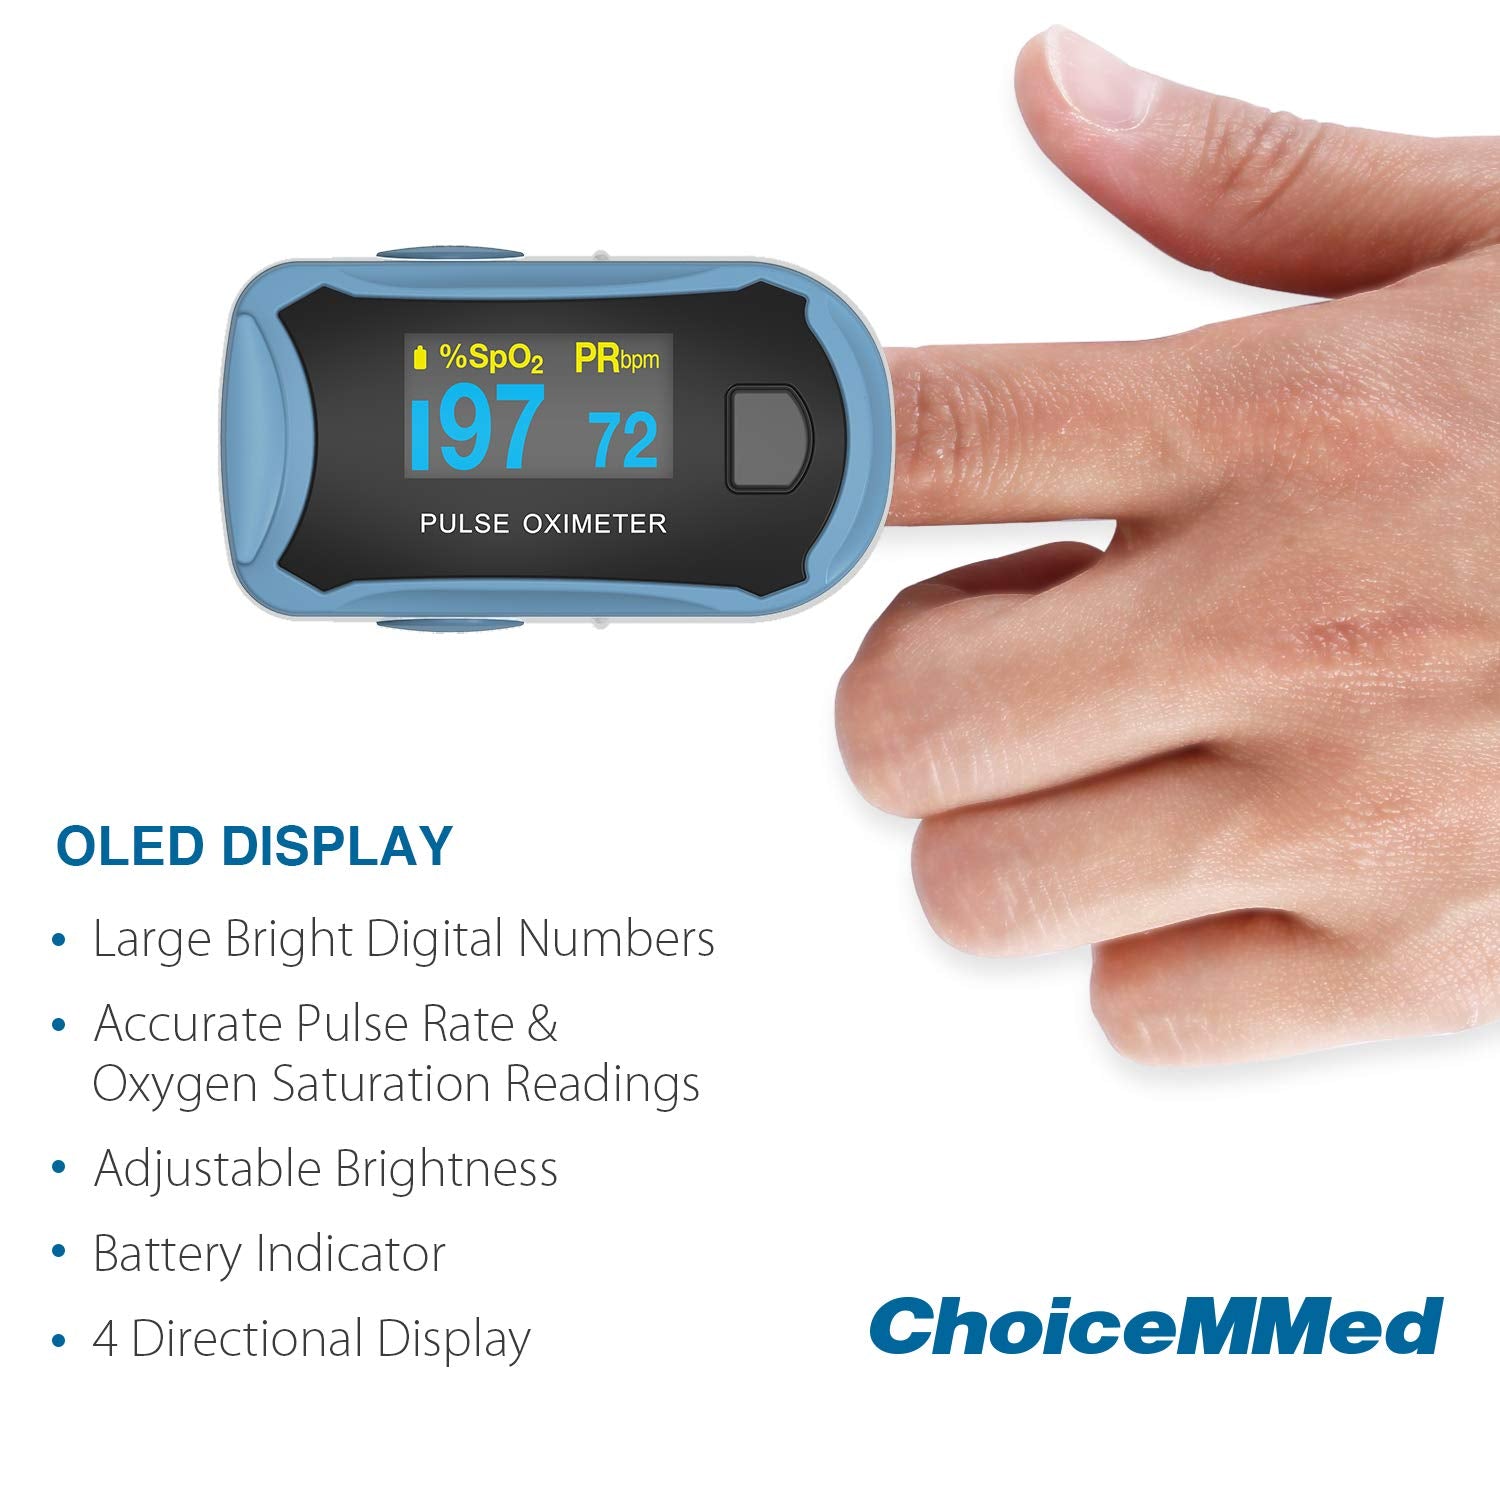 CHOICEMMED MD300C29 Finger Pulse Oximeter with Color OLED Screen Display & Batteries - Grey, Black